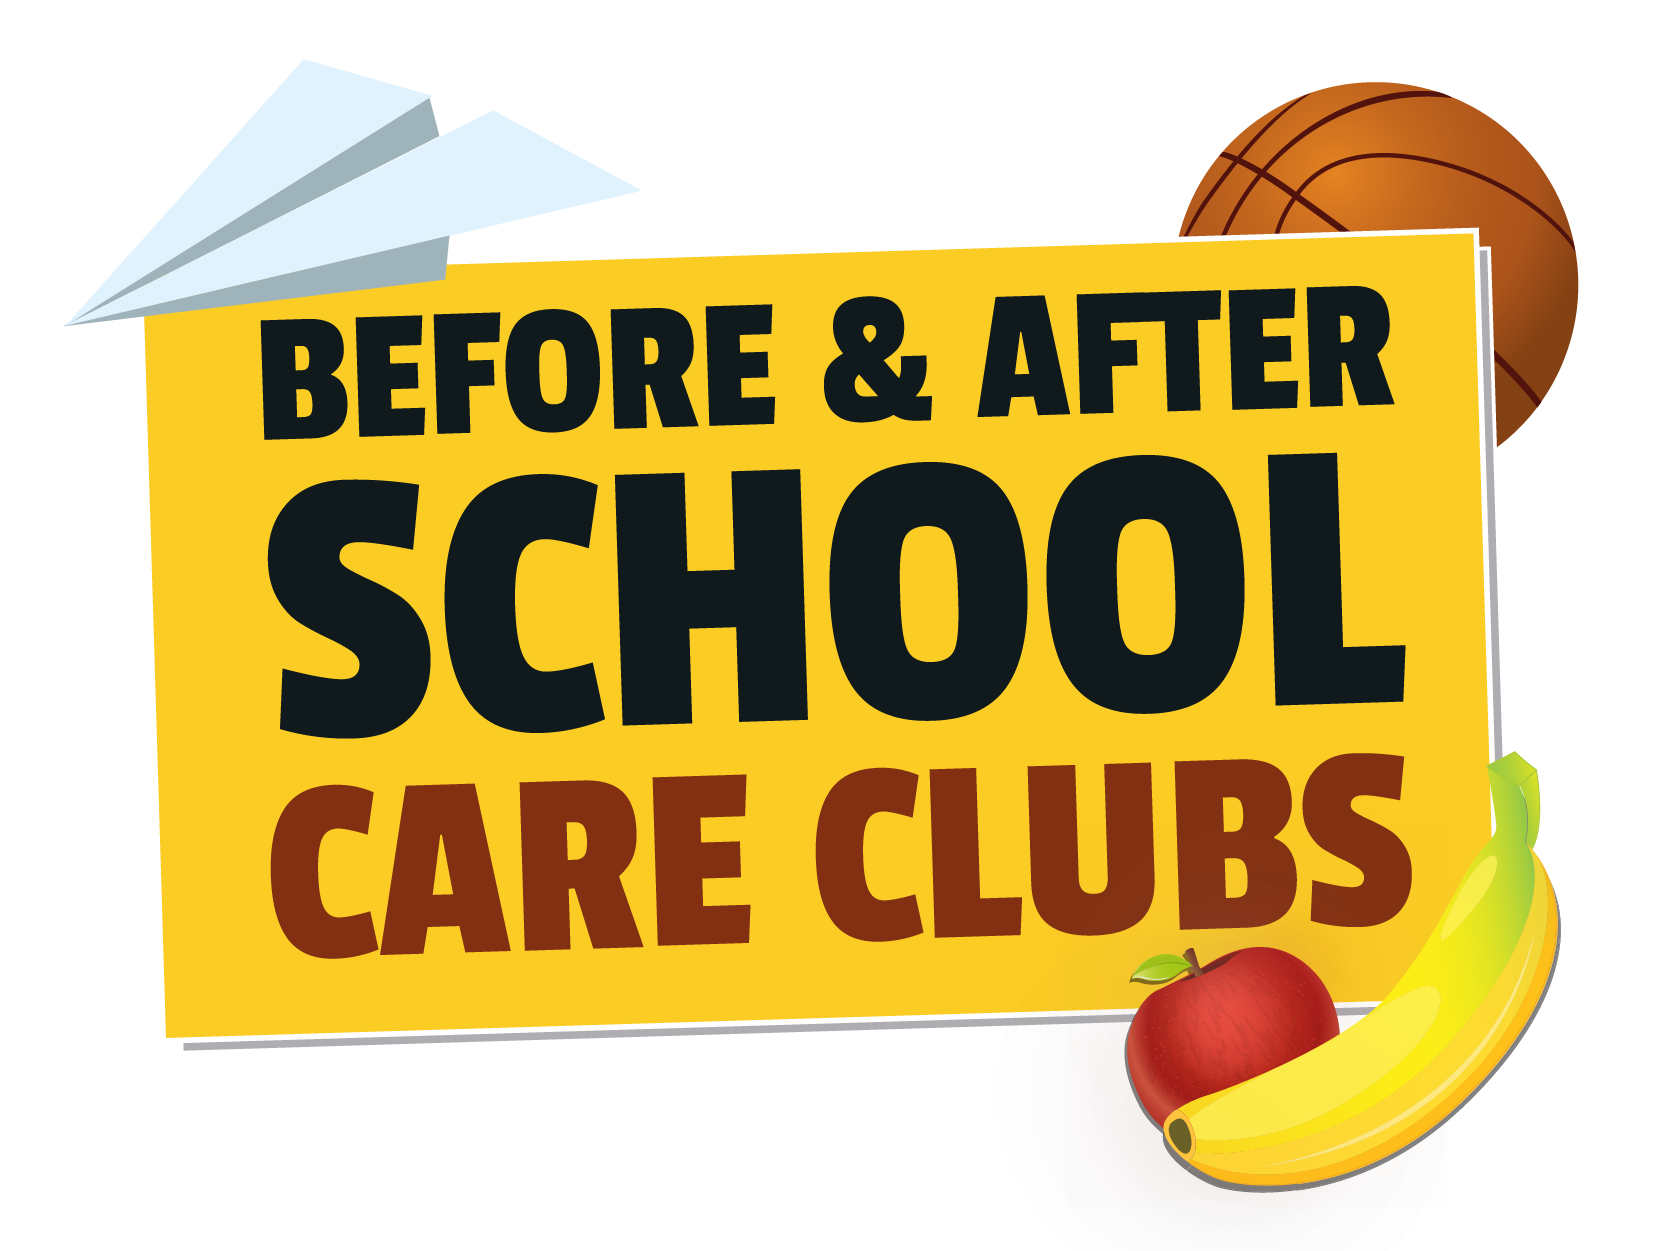 Before & After School Care Clubs